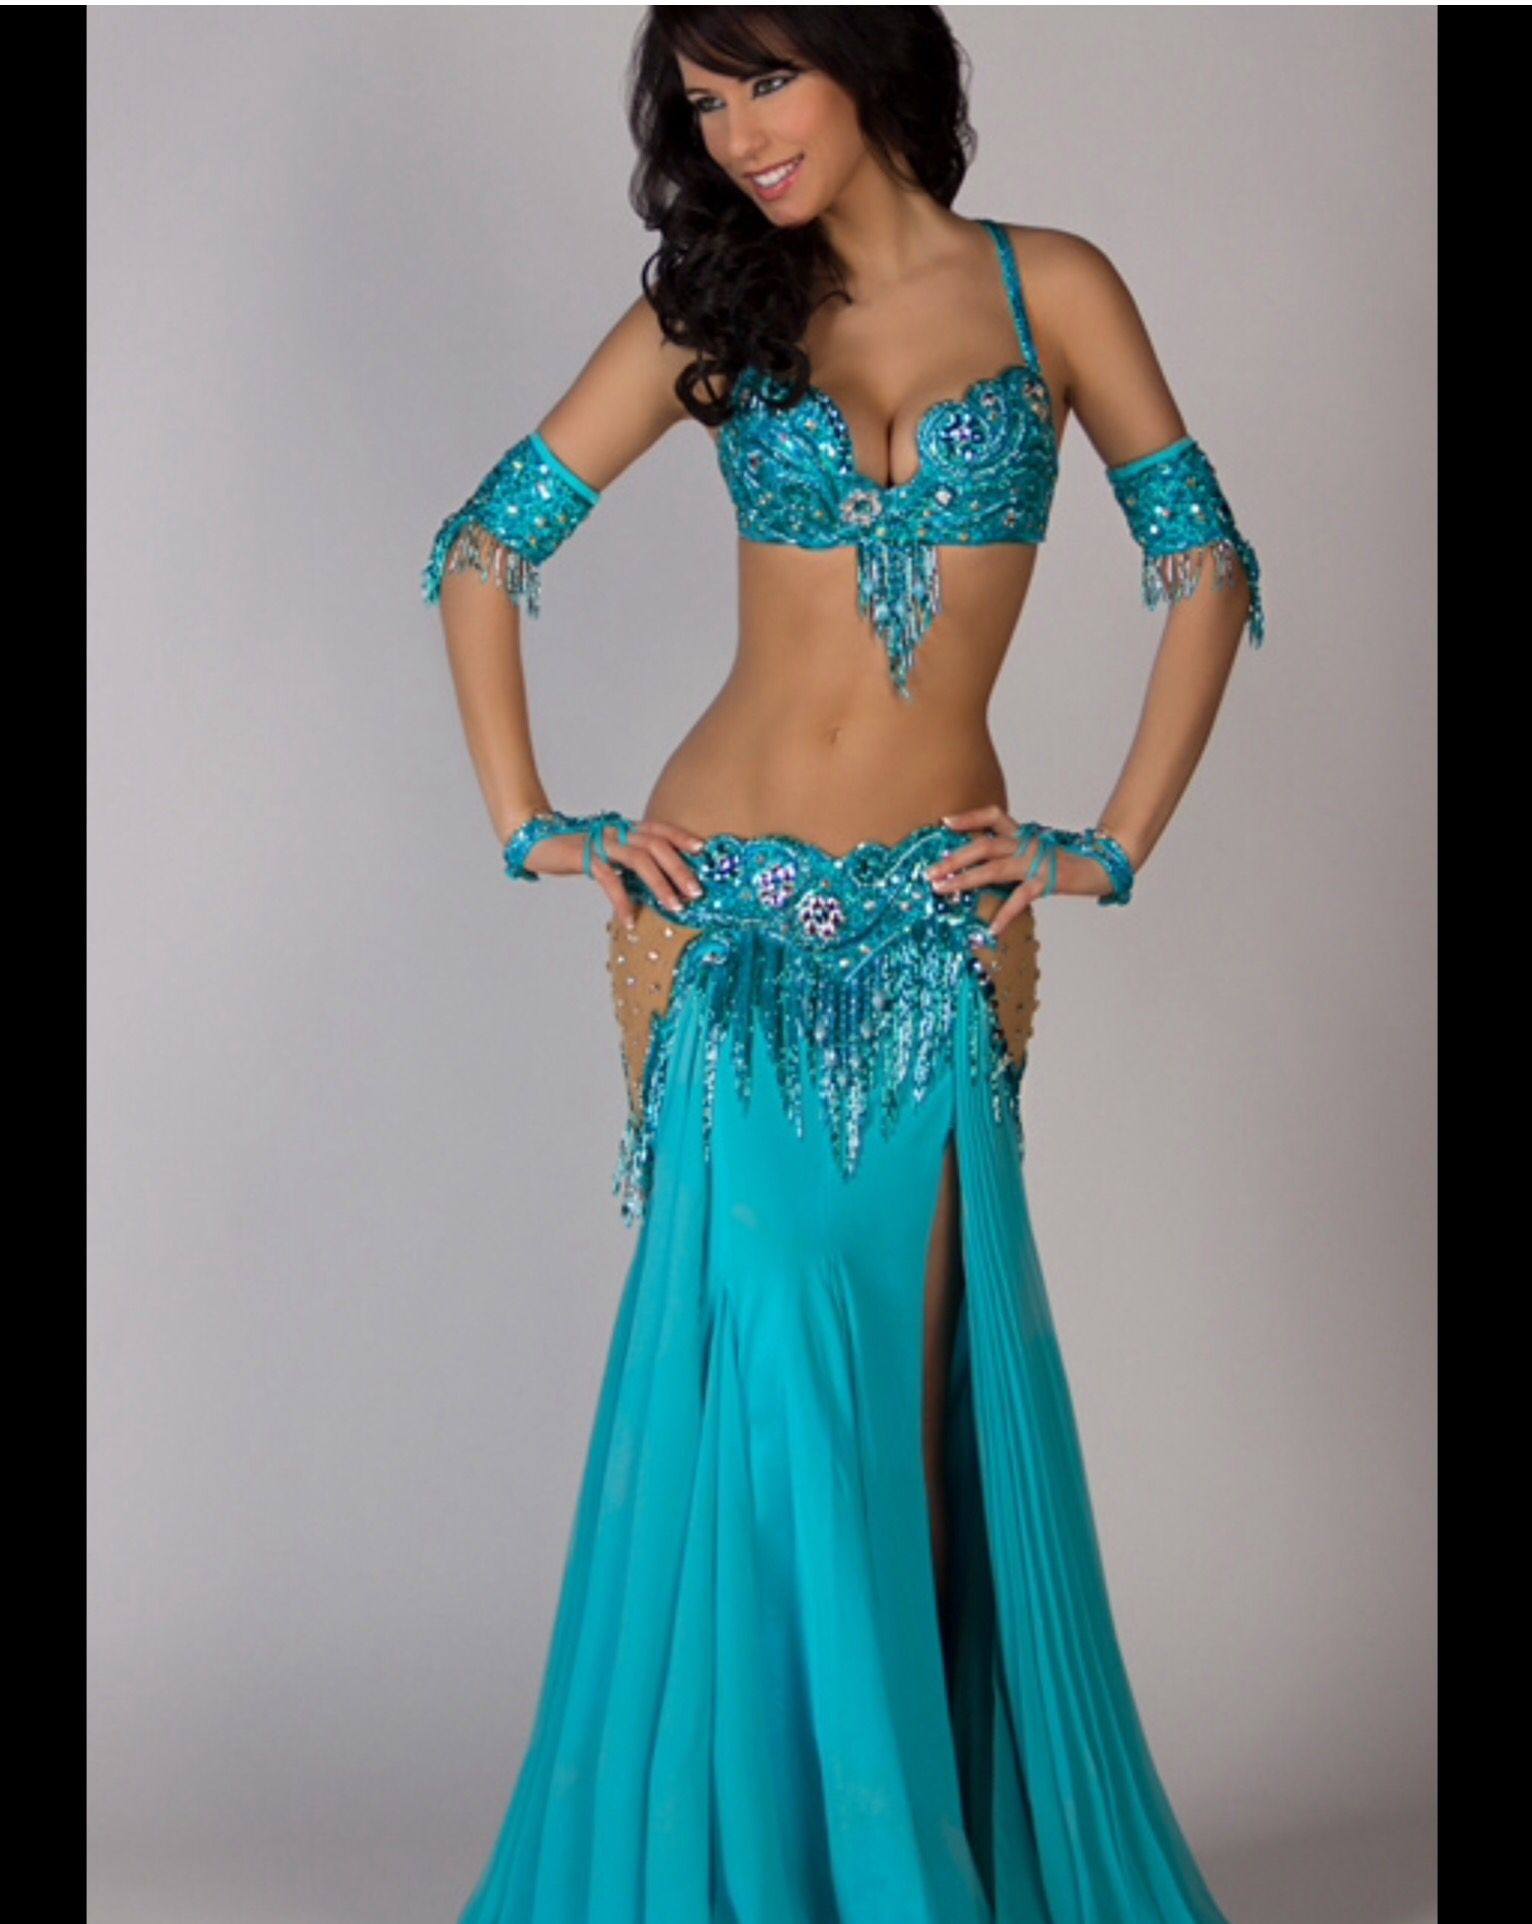 sexy belly dancer costumes